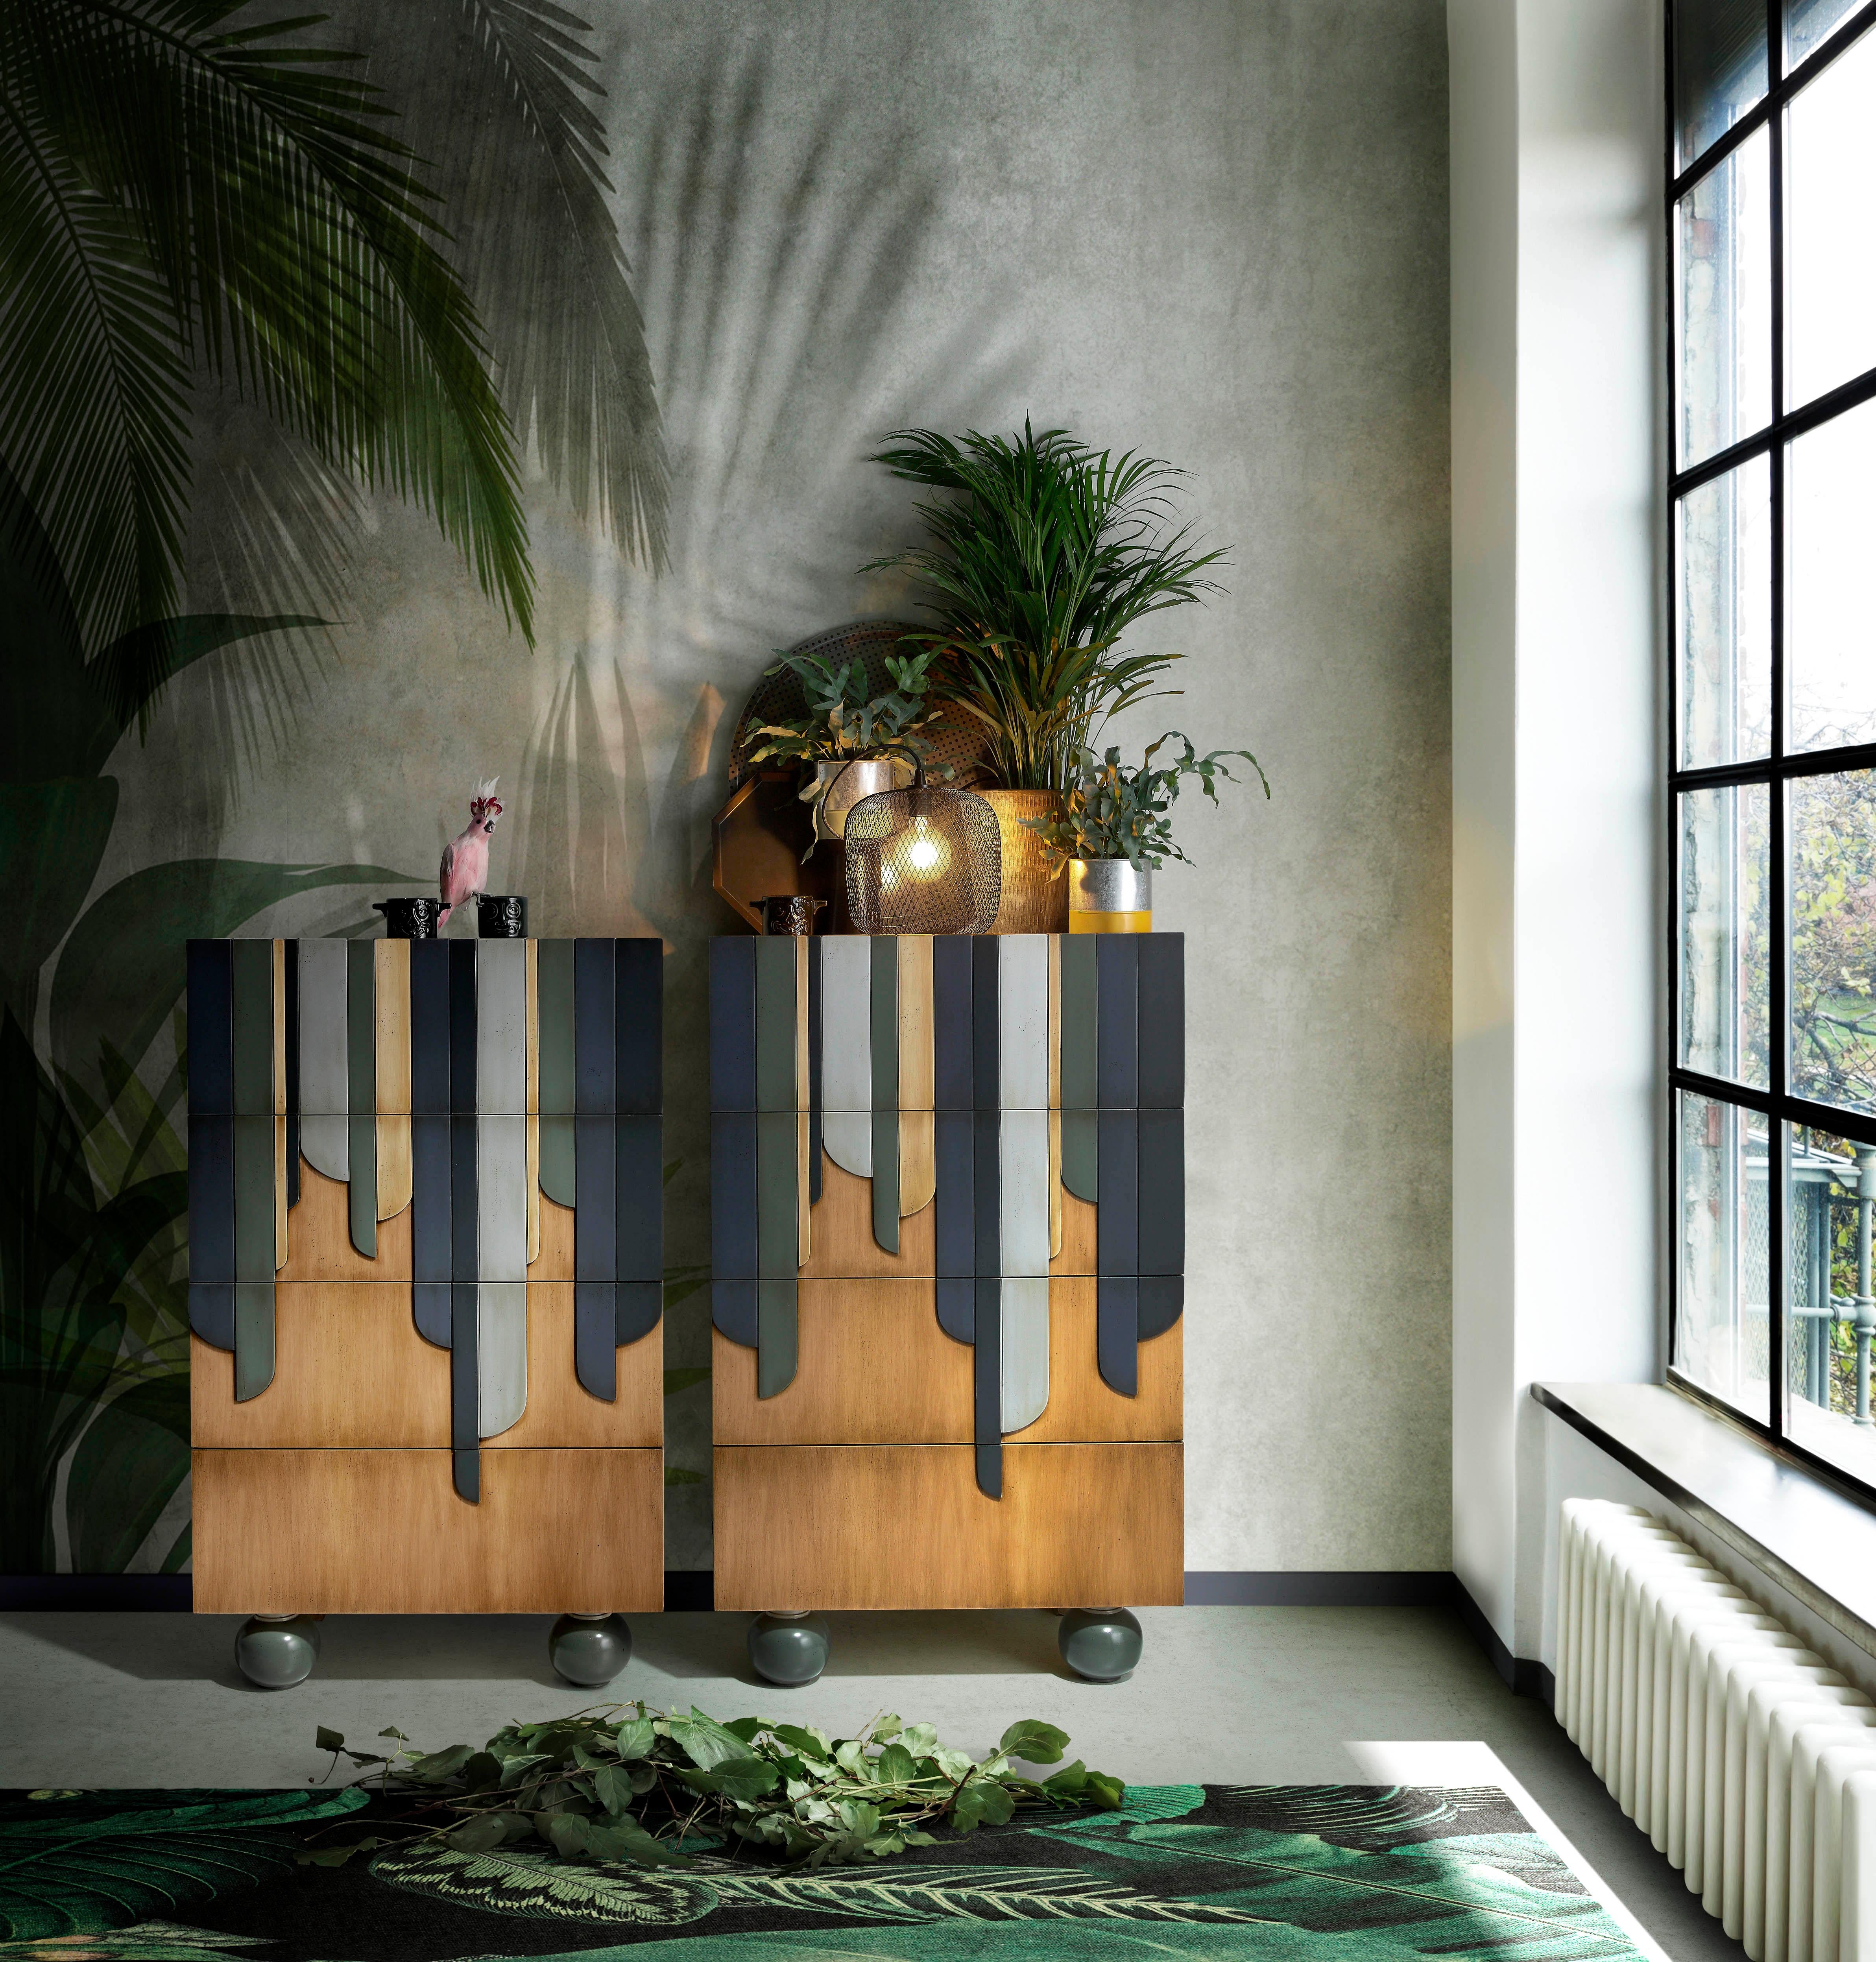 In love with this new chest of drawers from the Marieta serie. One by one or two by two. Lower than usual, placed in symmetry covers the space, without loading it, and gives it great functionality And look at that interiors.